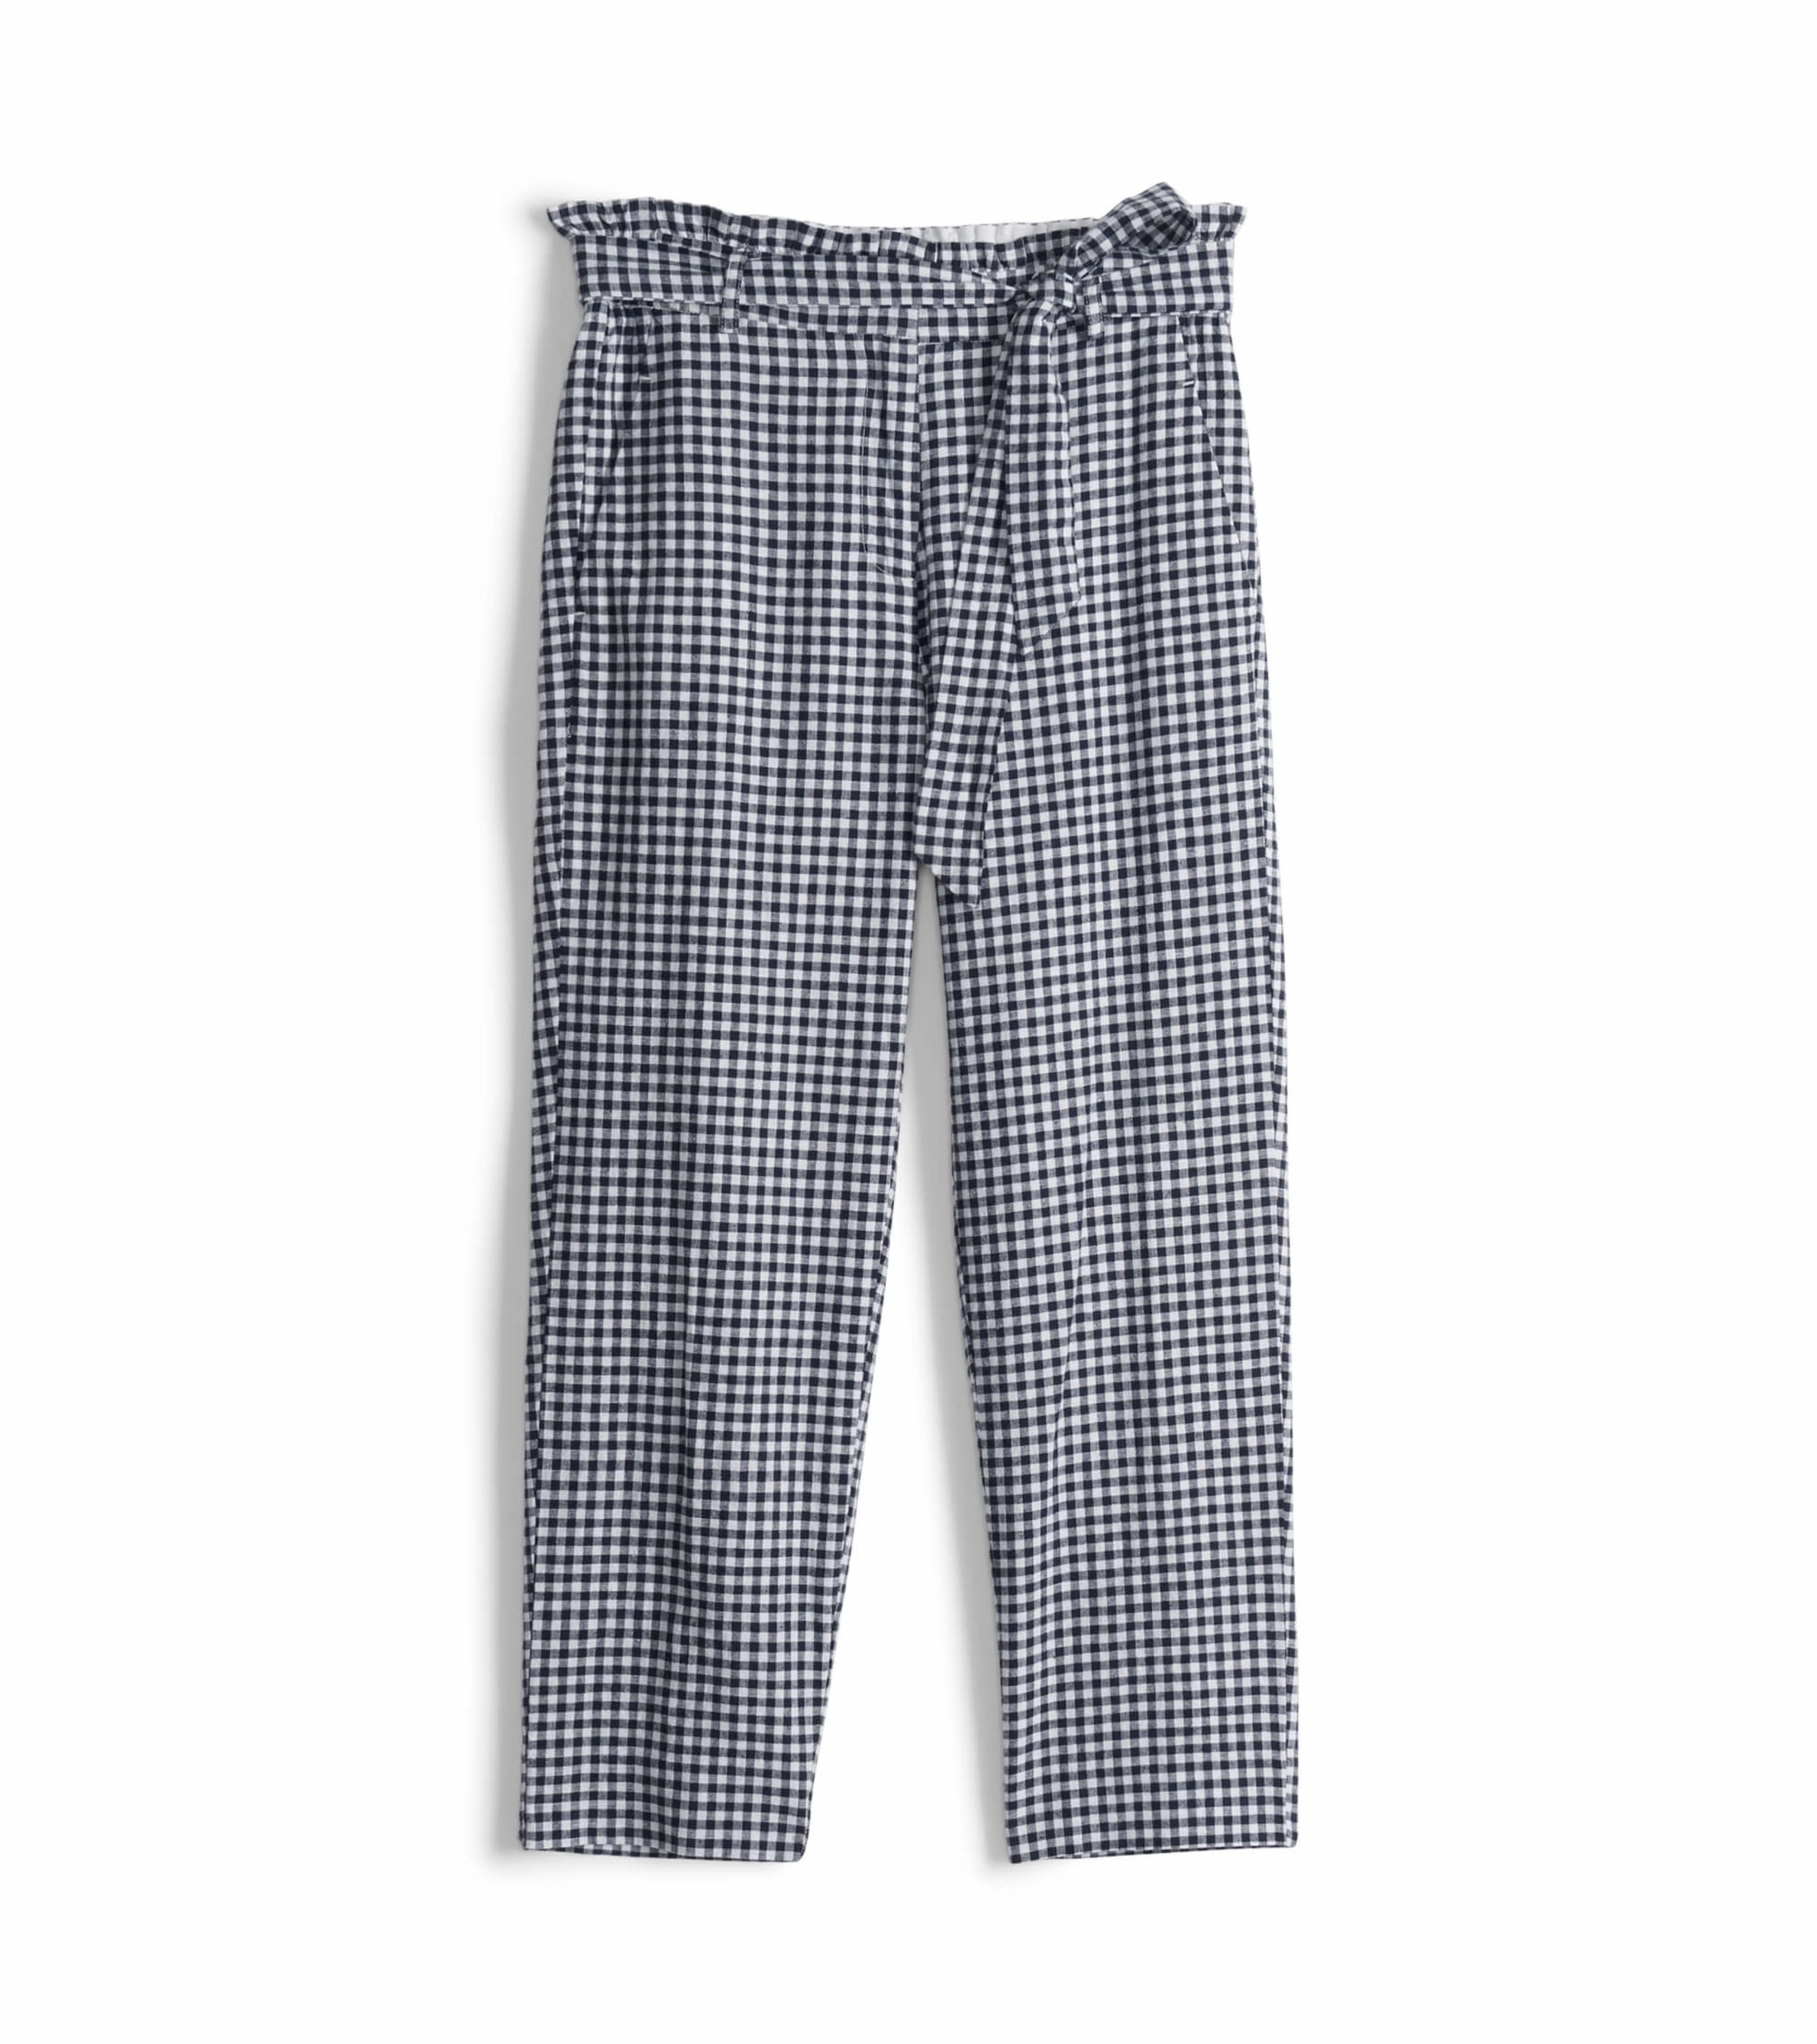 How to Style Gingham Pants for Work | Connecticut Fashion and Lifestyle  Blog | Covering the Bases